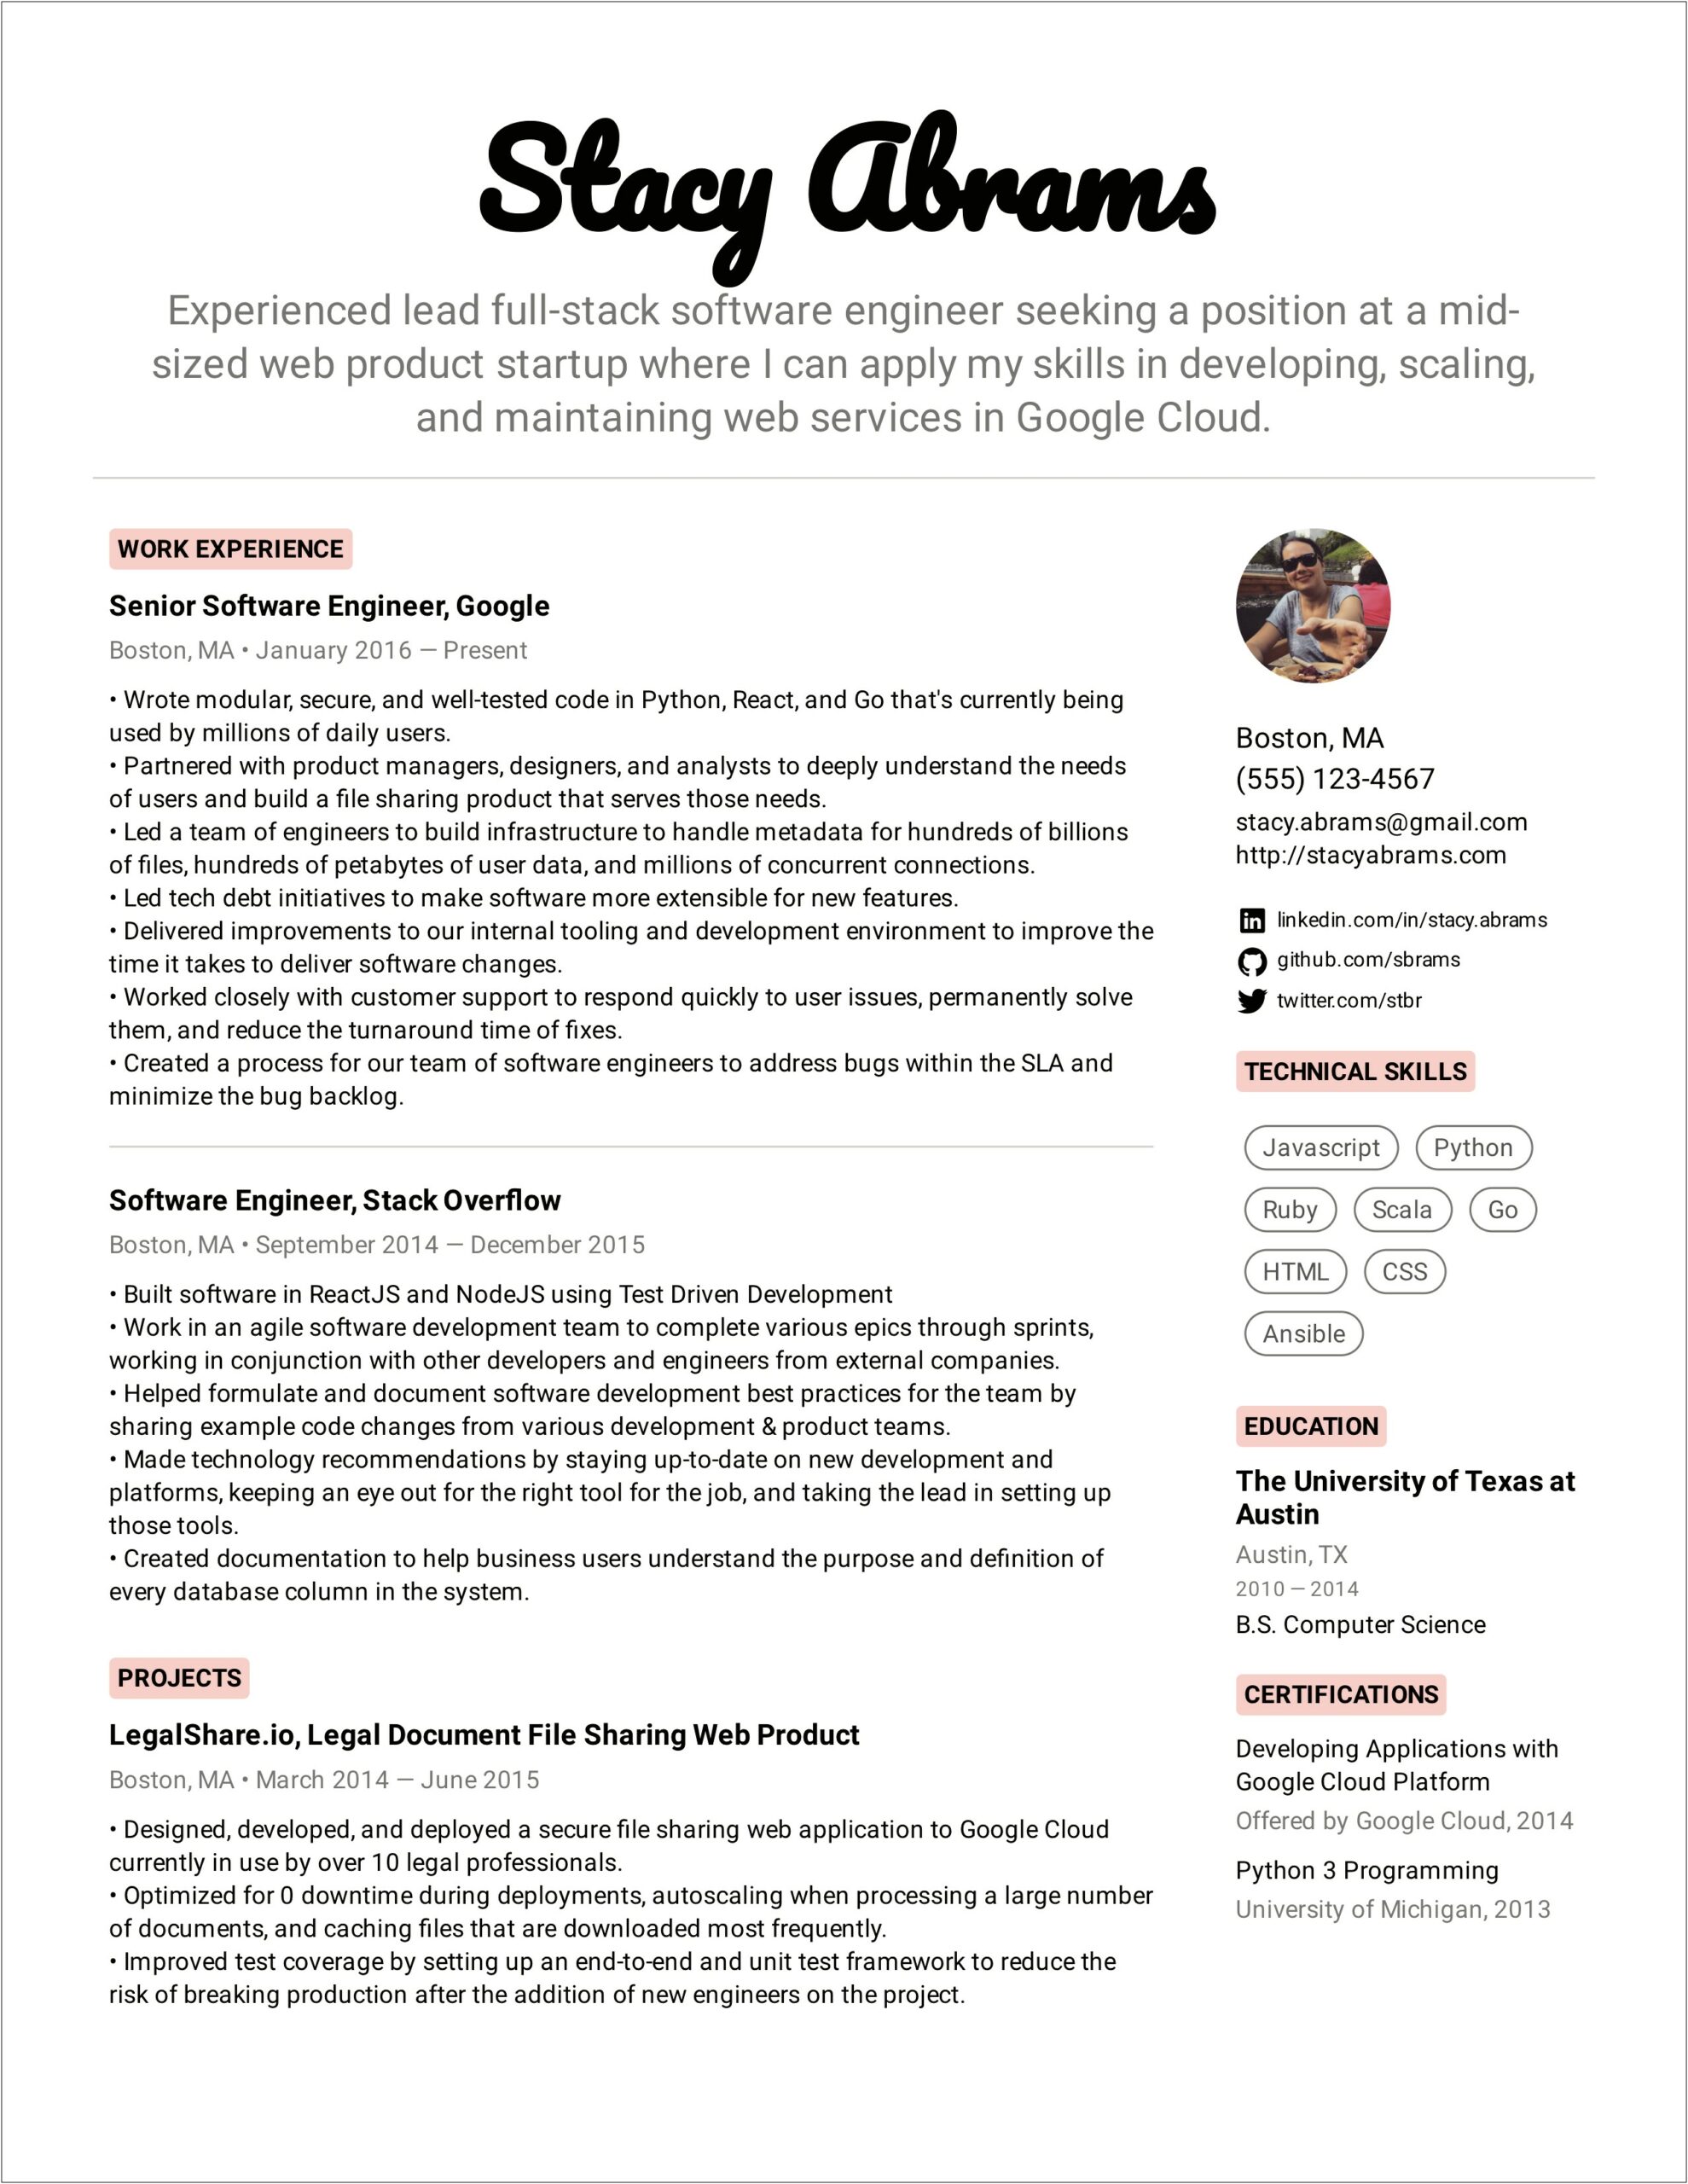 Resume Summary Samples For Engineers